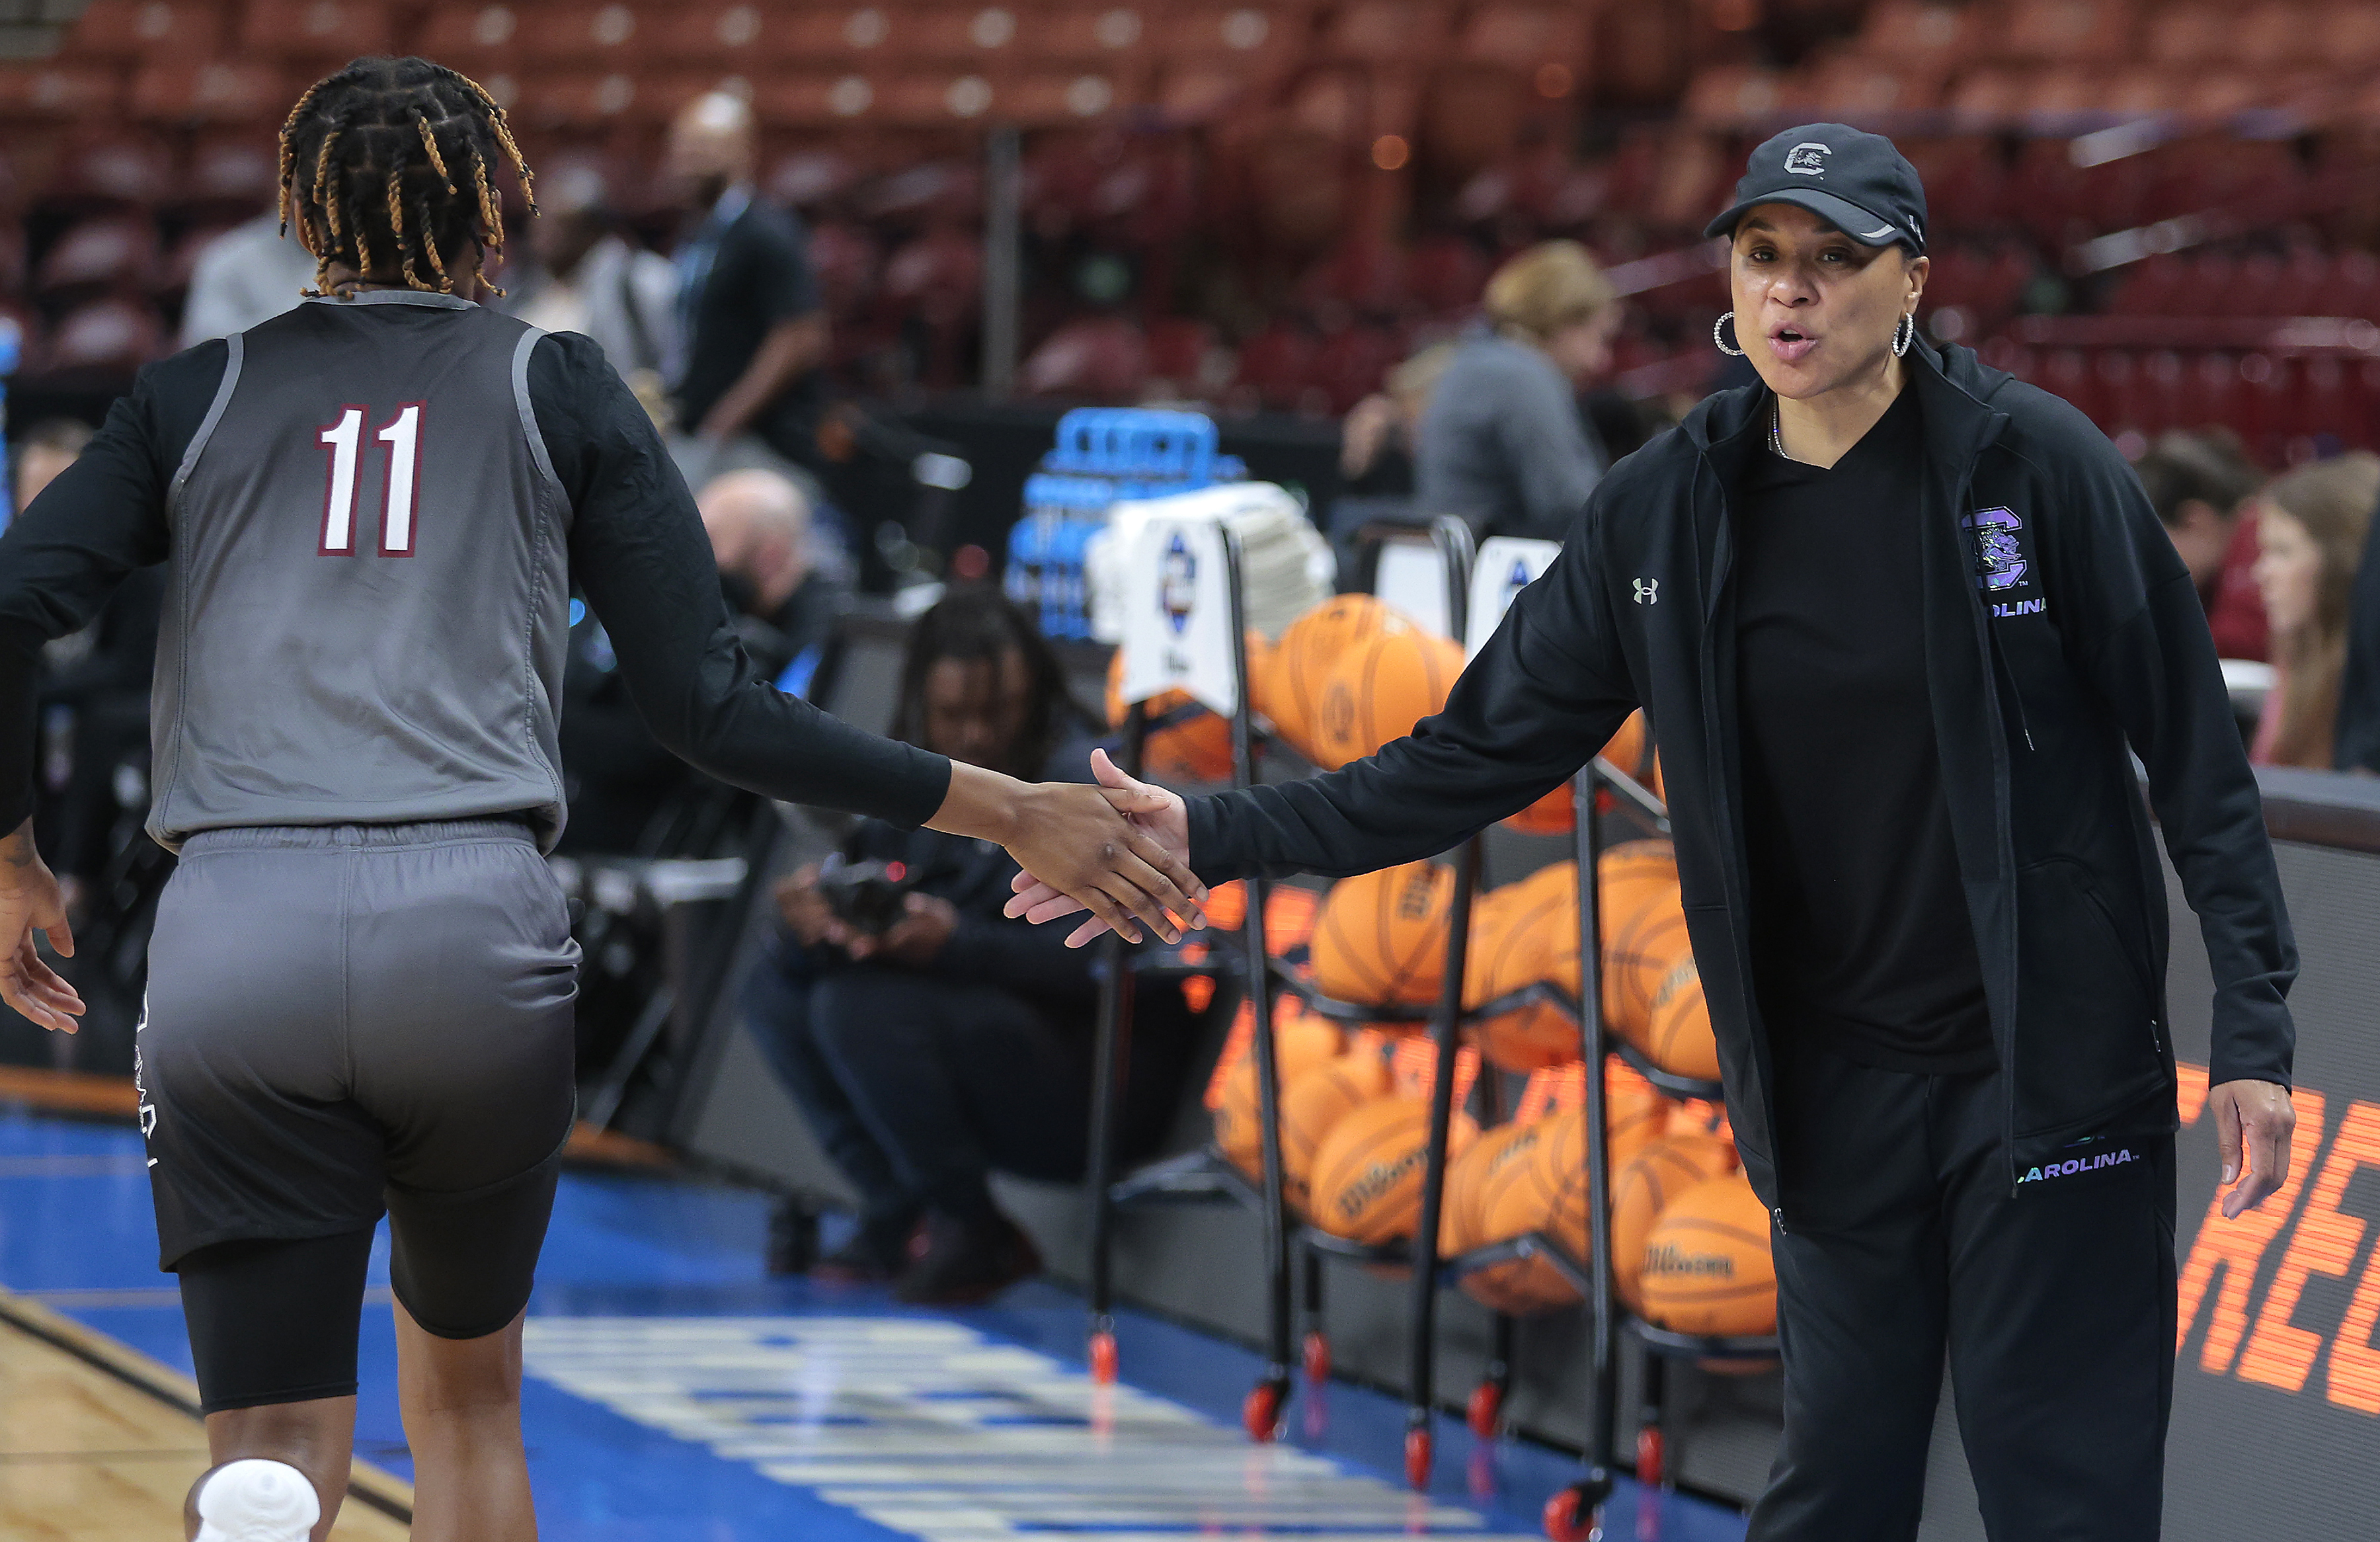 March Madness: Dawn Staley's wears a Cheyney jersey while coaching